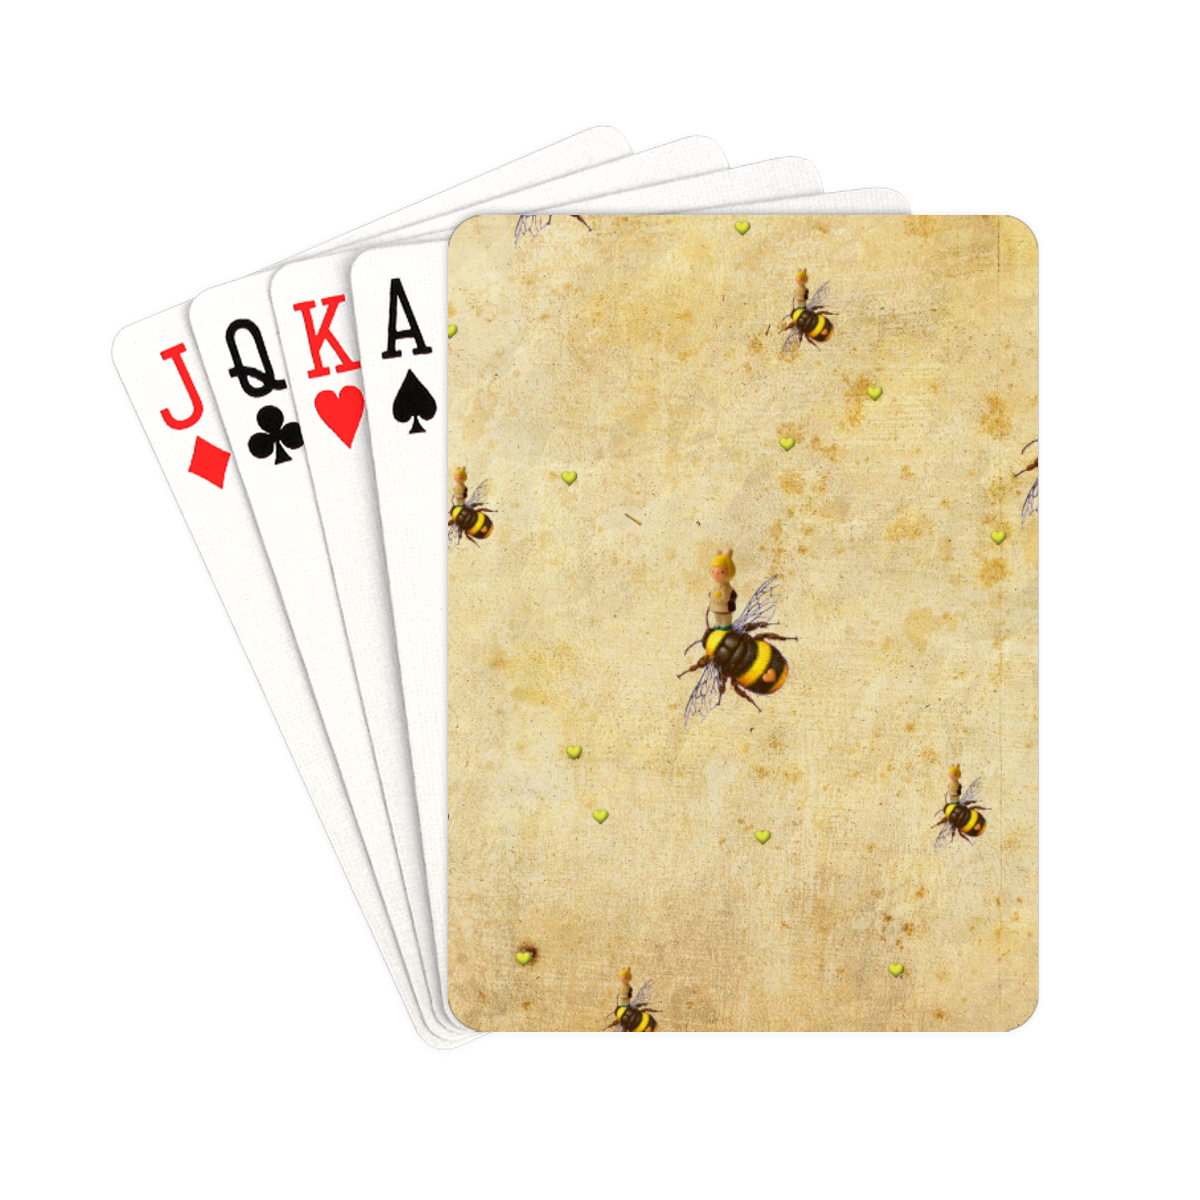 Daisy's Bees Playing Cards 2.5"x3.5"